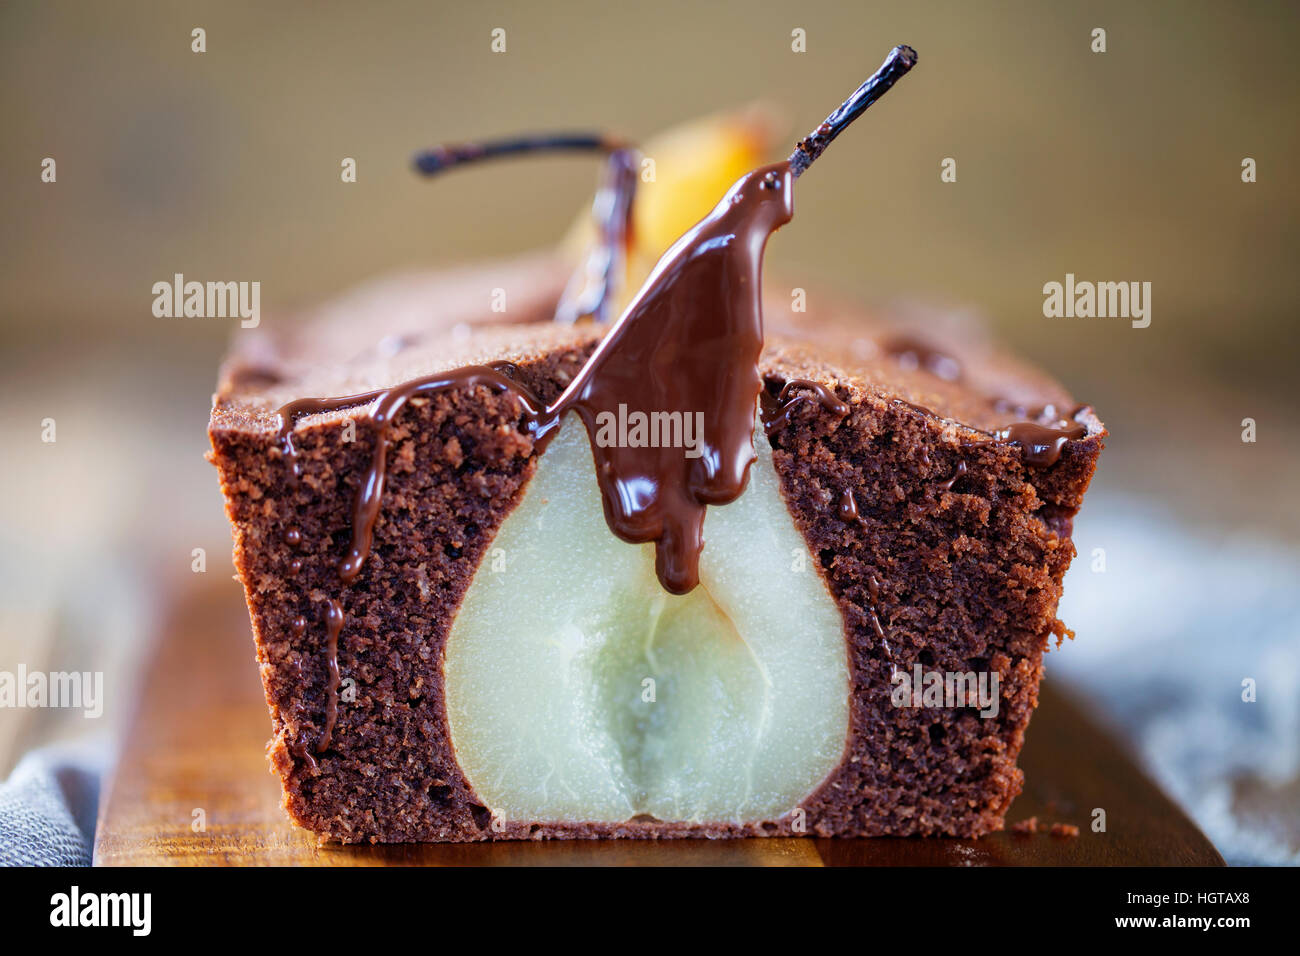 Chocolate sponge cake with poached pear Stock Photo